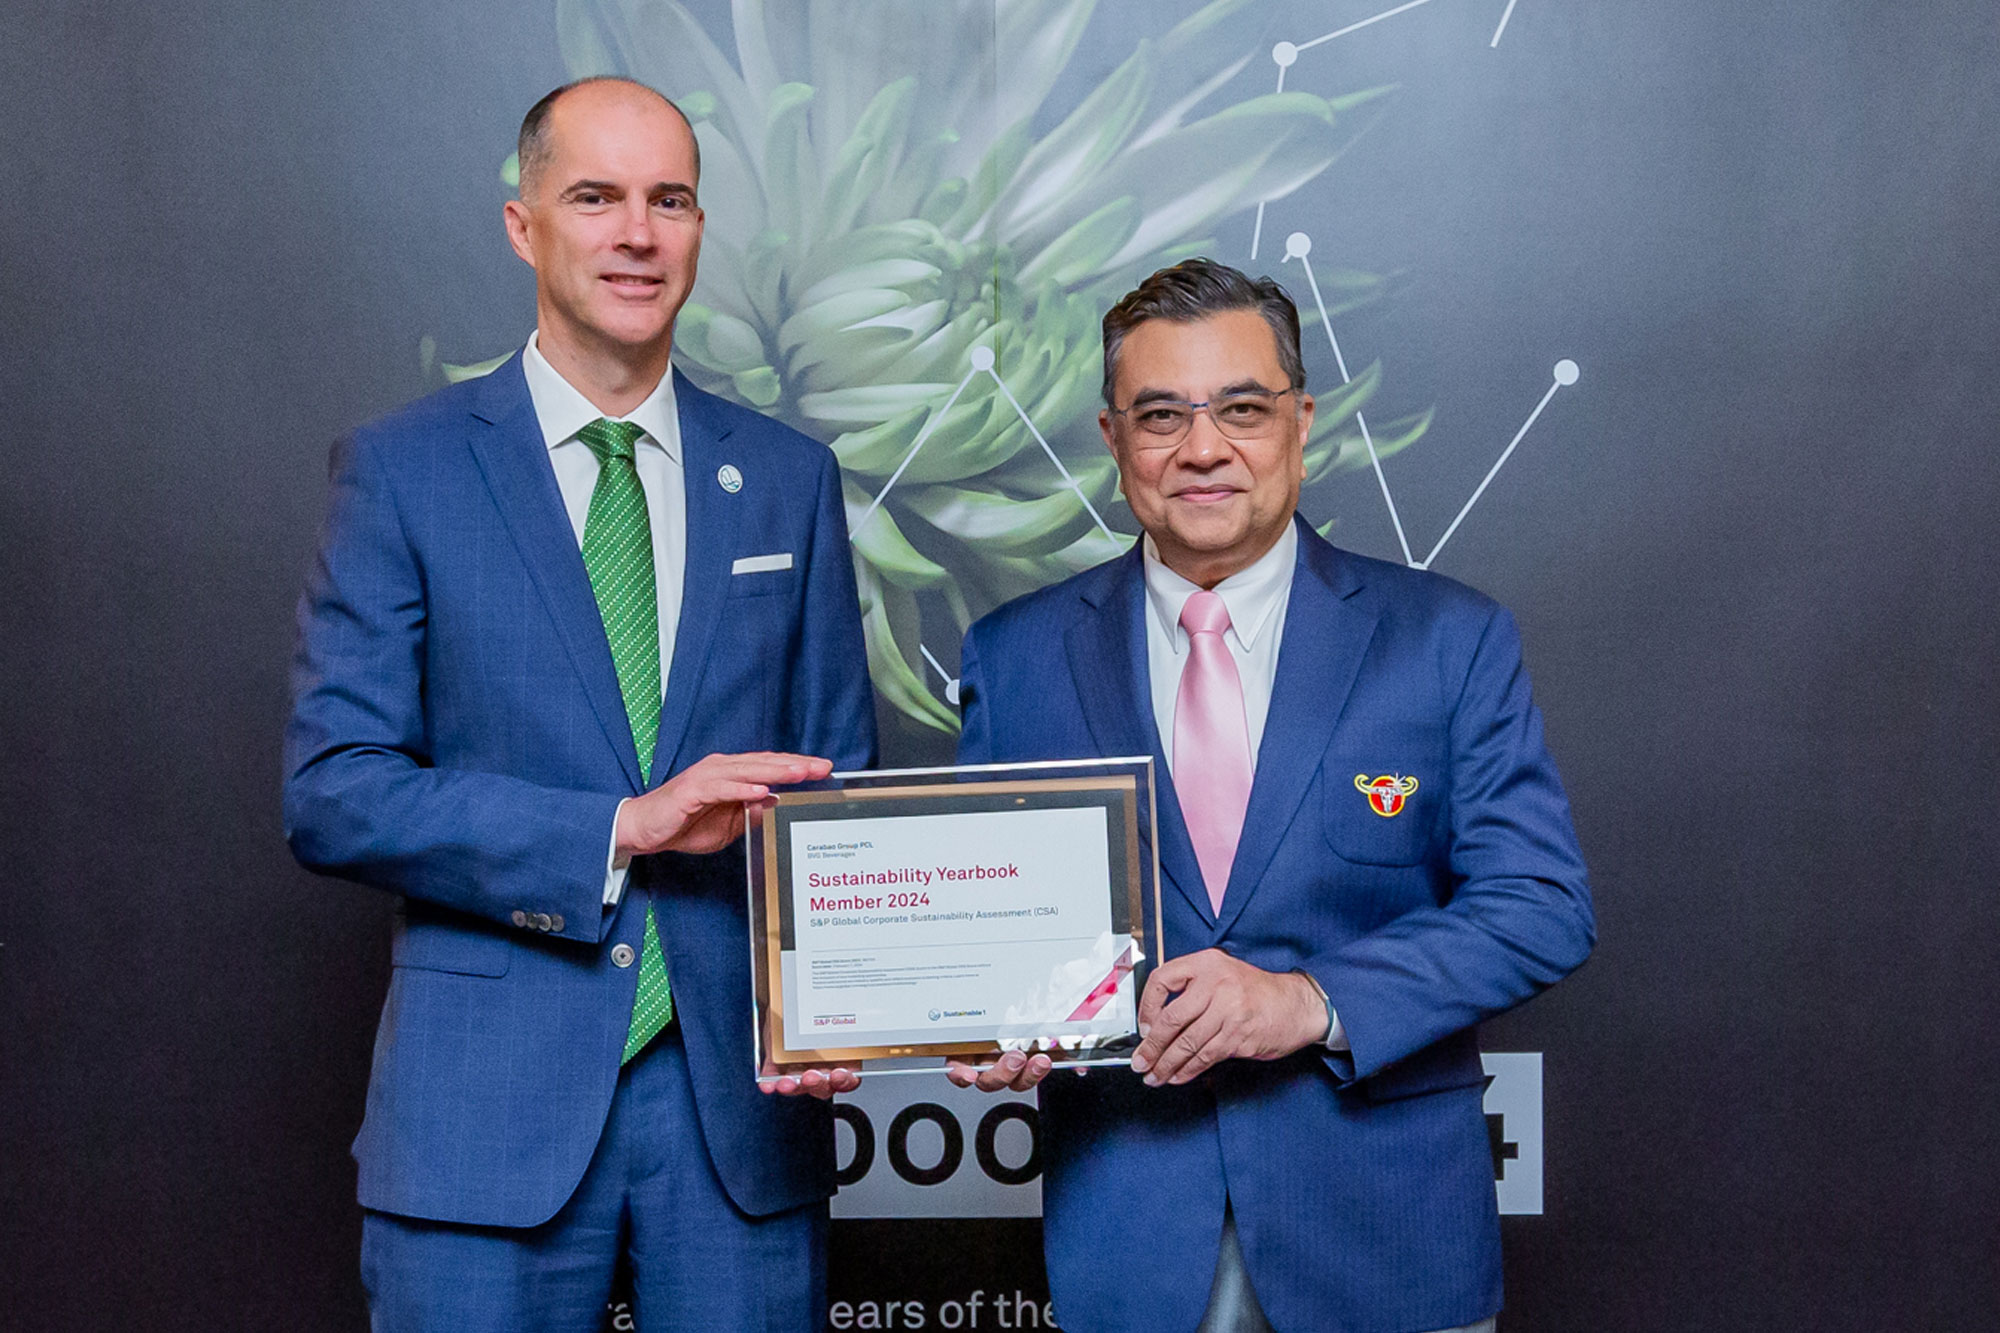 Carabao Group Honored with Global Corporate Sustainability Award by S&P Global, Reinforcing Vision of “World Class Product, World Class Brand”